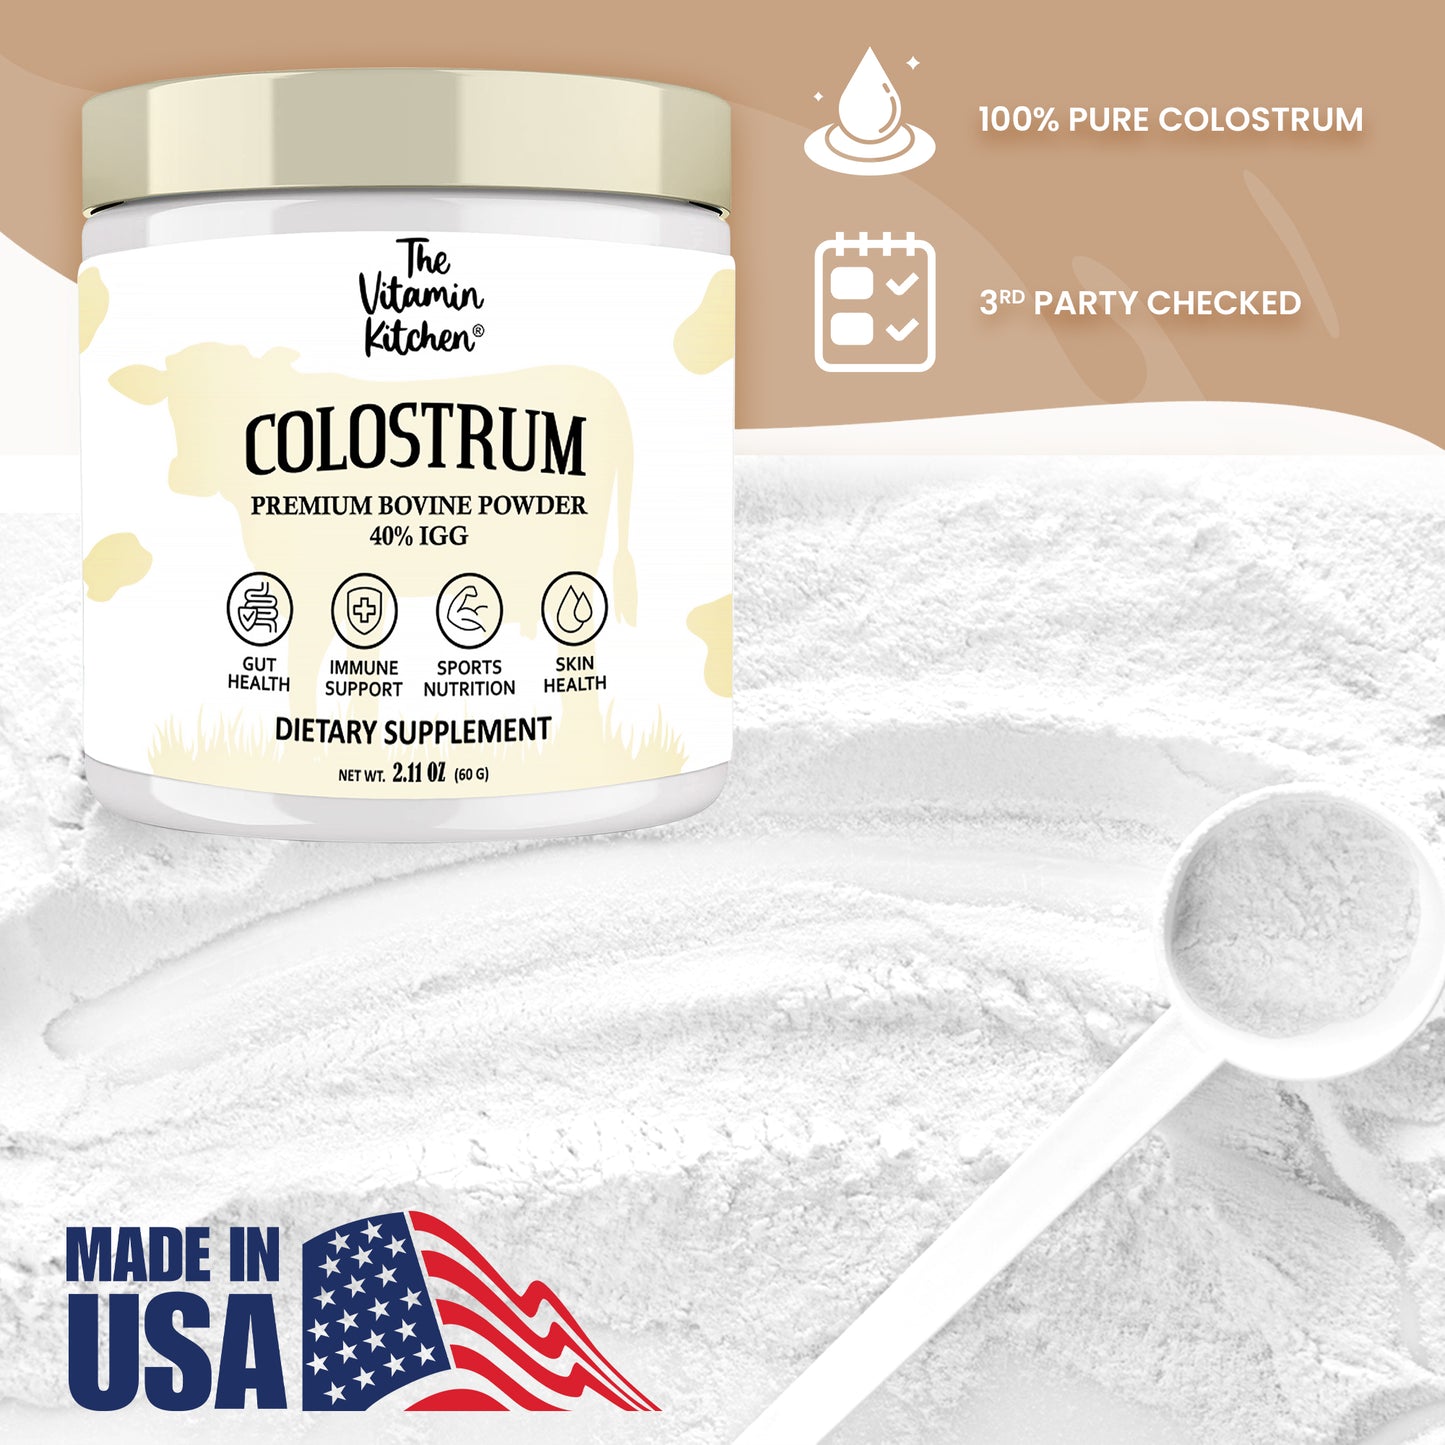 Colostrum Powder Supplement for Immune Support, Skin Health, Muscle Recovery & Gut Health – 40% IgG Advanced Bovine Colostrum Superfood Powder – Unflavored, Non-GMO Made in USA – (60 servings)